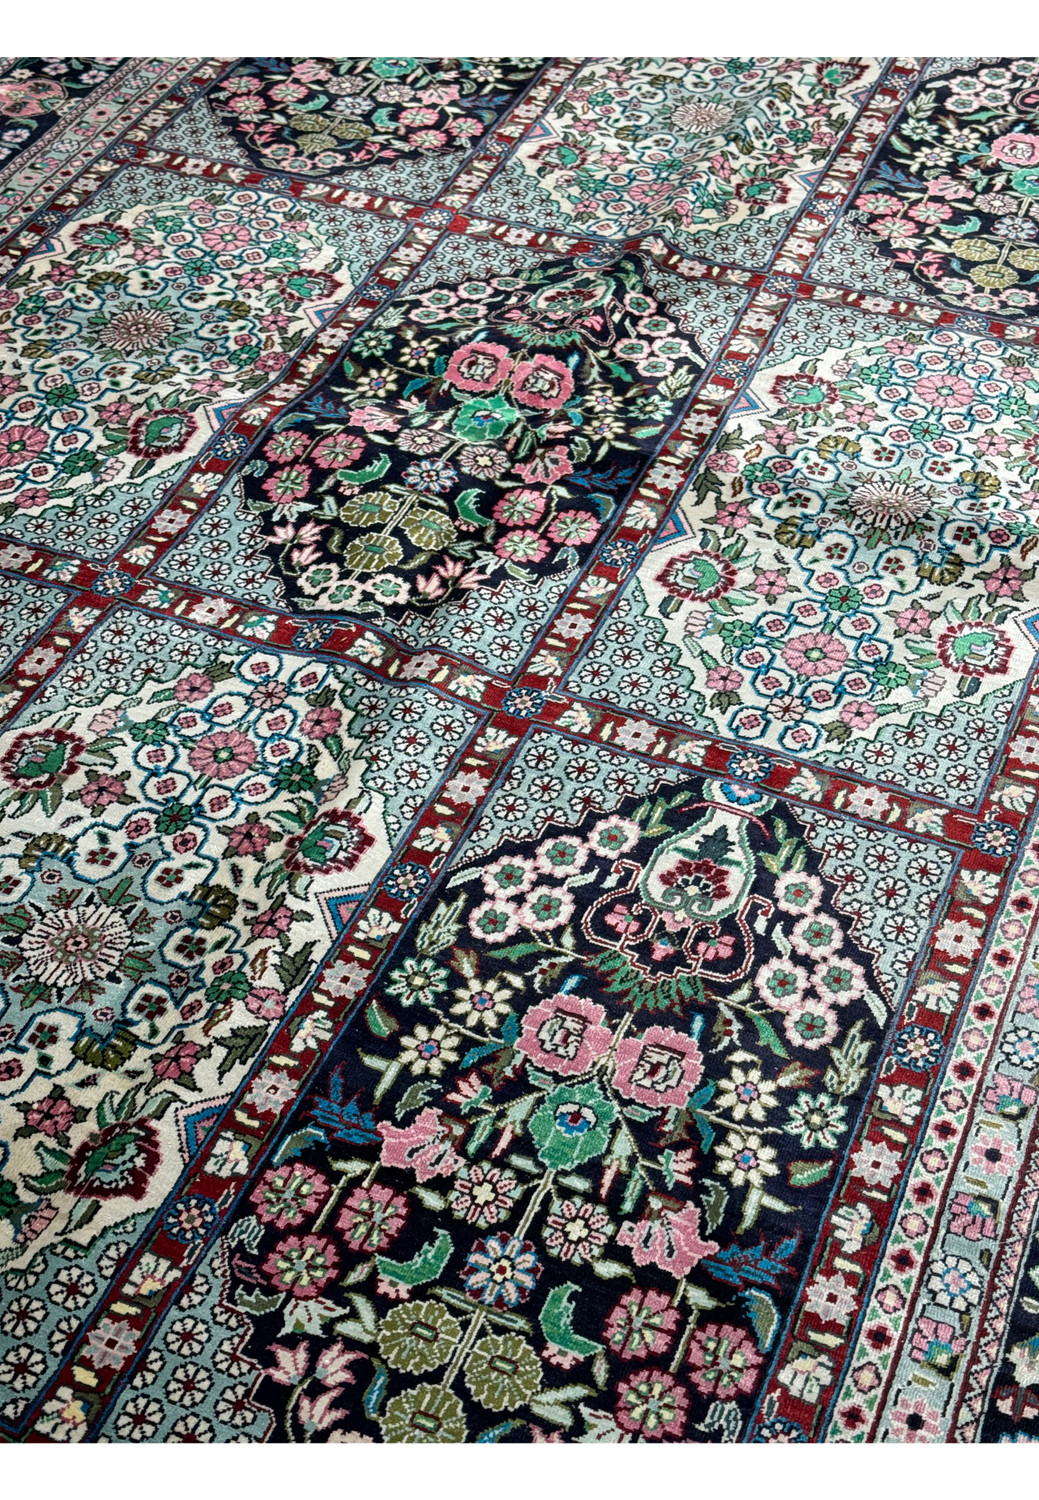 Edge-to-edge view of a Persian Qum silk rug, featuring complex floral motifs and a traditional design